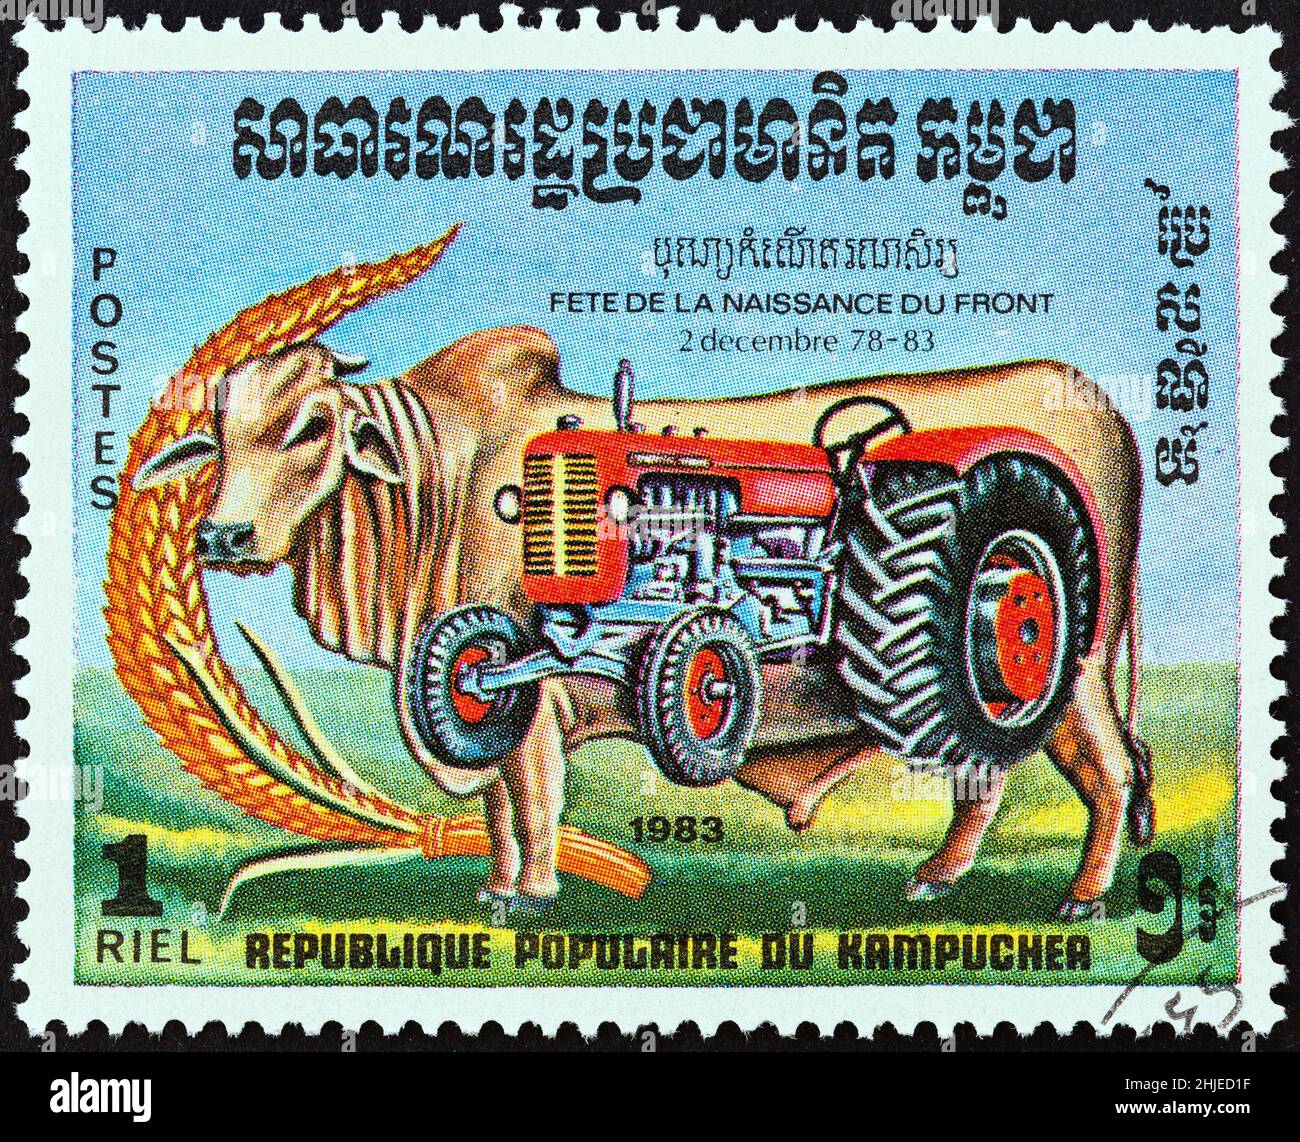 KAMPUCHEA - CIRCA 1983: A stamp printed in Kampuchea shows Grain, Cattle and Tractor, circa 1983. Stock Photo